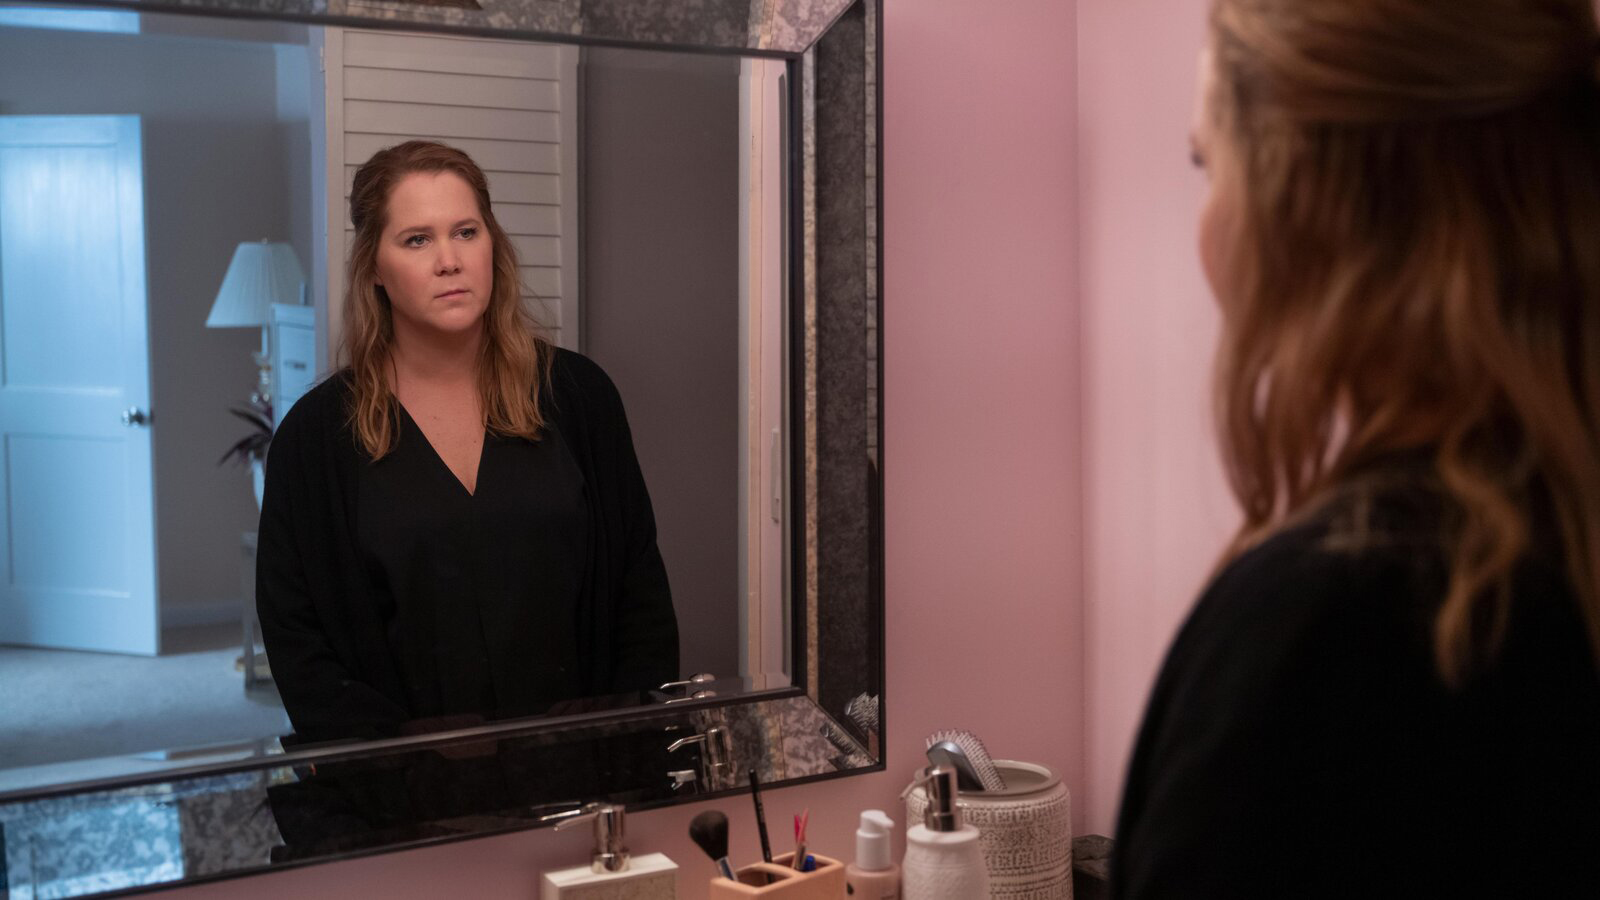 Amy Schumer stars as Beth in the new series "Life & Beth". Photo by Marcus Price/Hulu